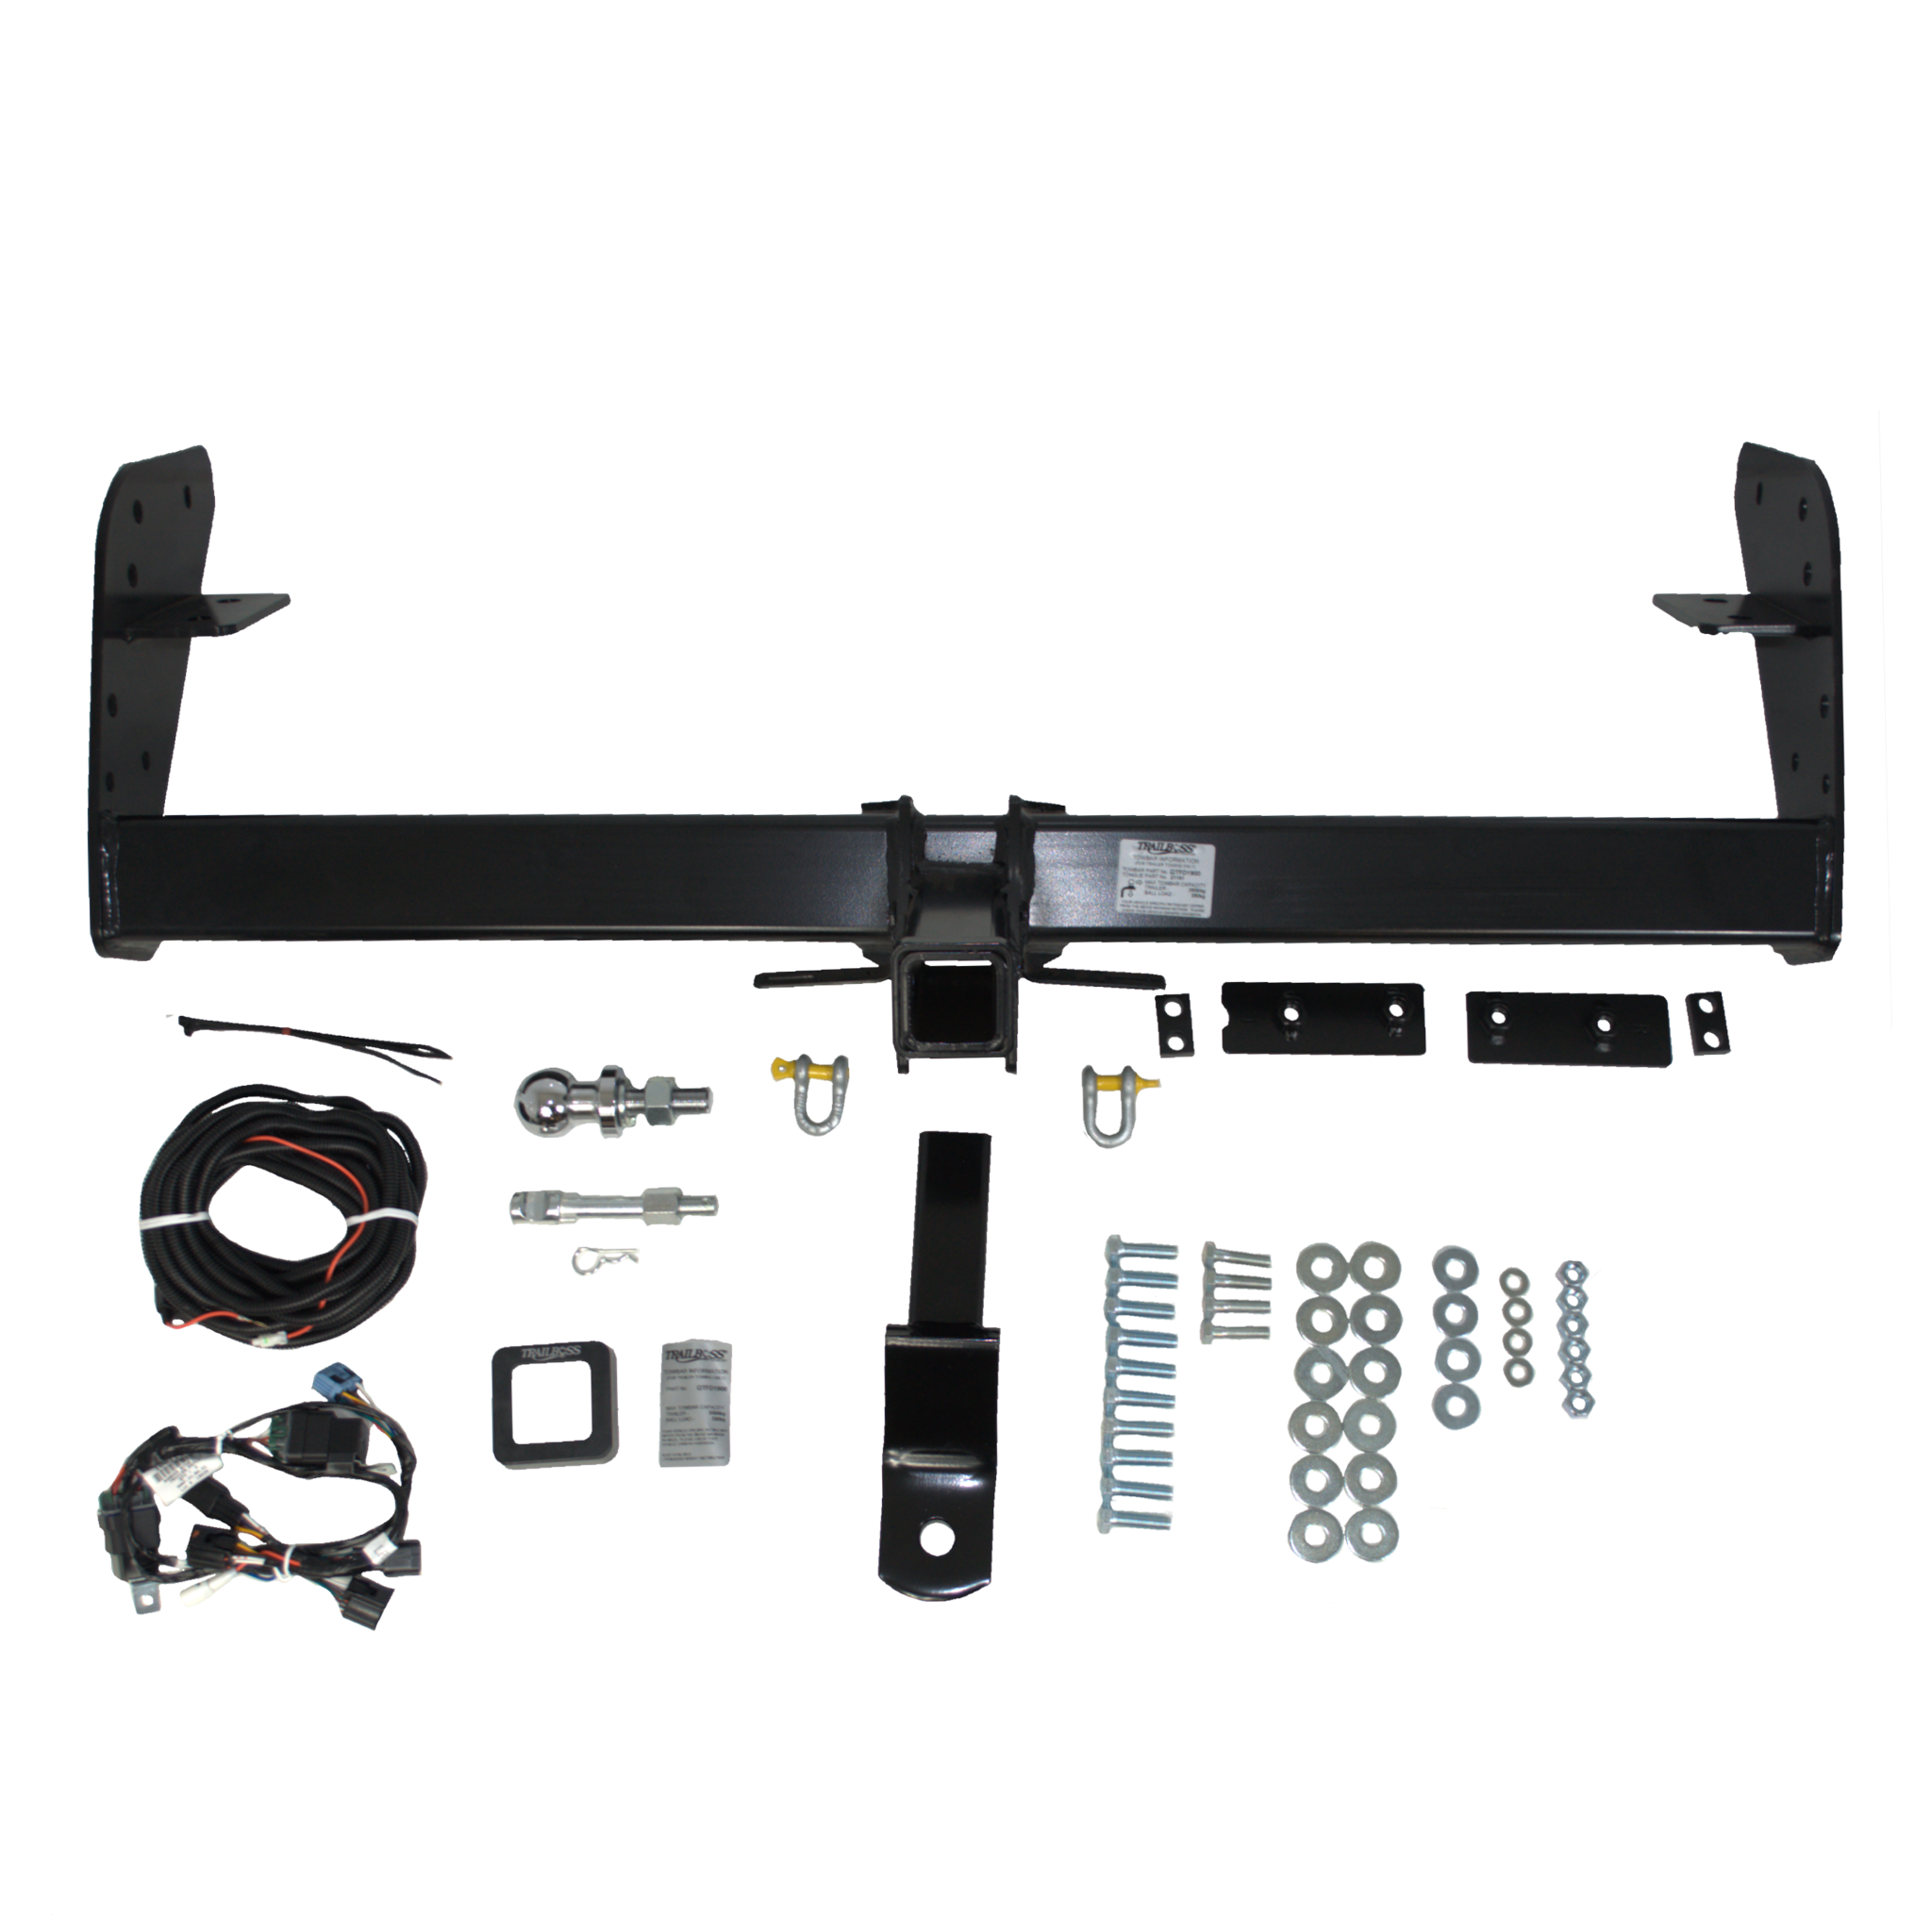 Ford Ranger 2wd & 4wd Tub Body With Bumper 08/2015 - 04/2022 (Relay Harness) - Towbar Kit - HEAVY DUTY PREMIUM